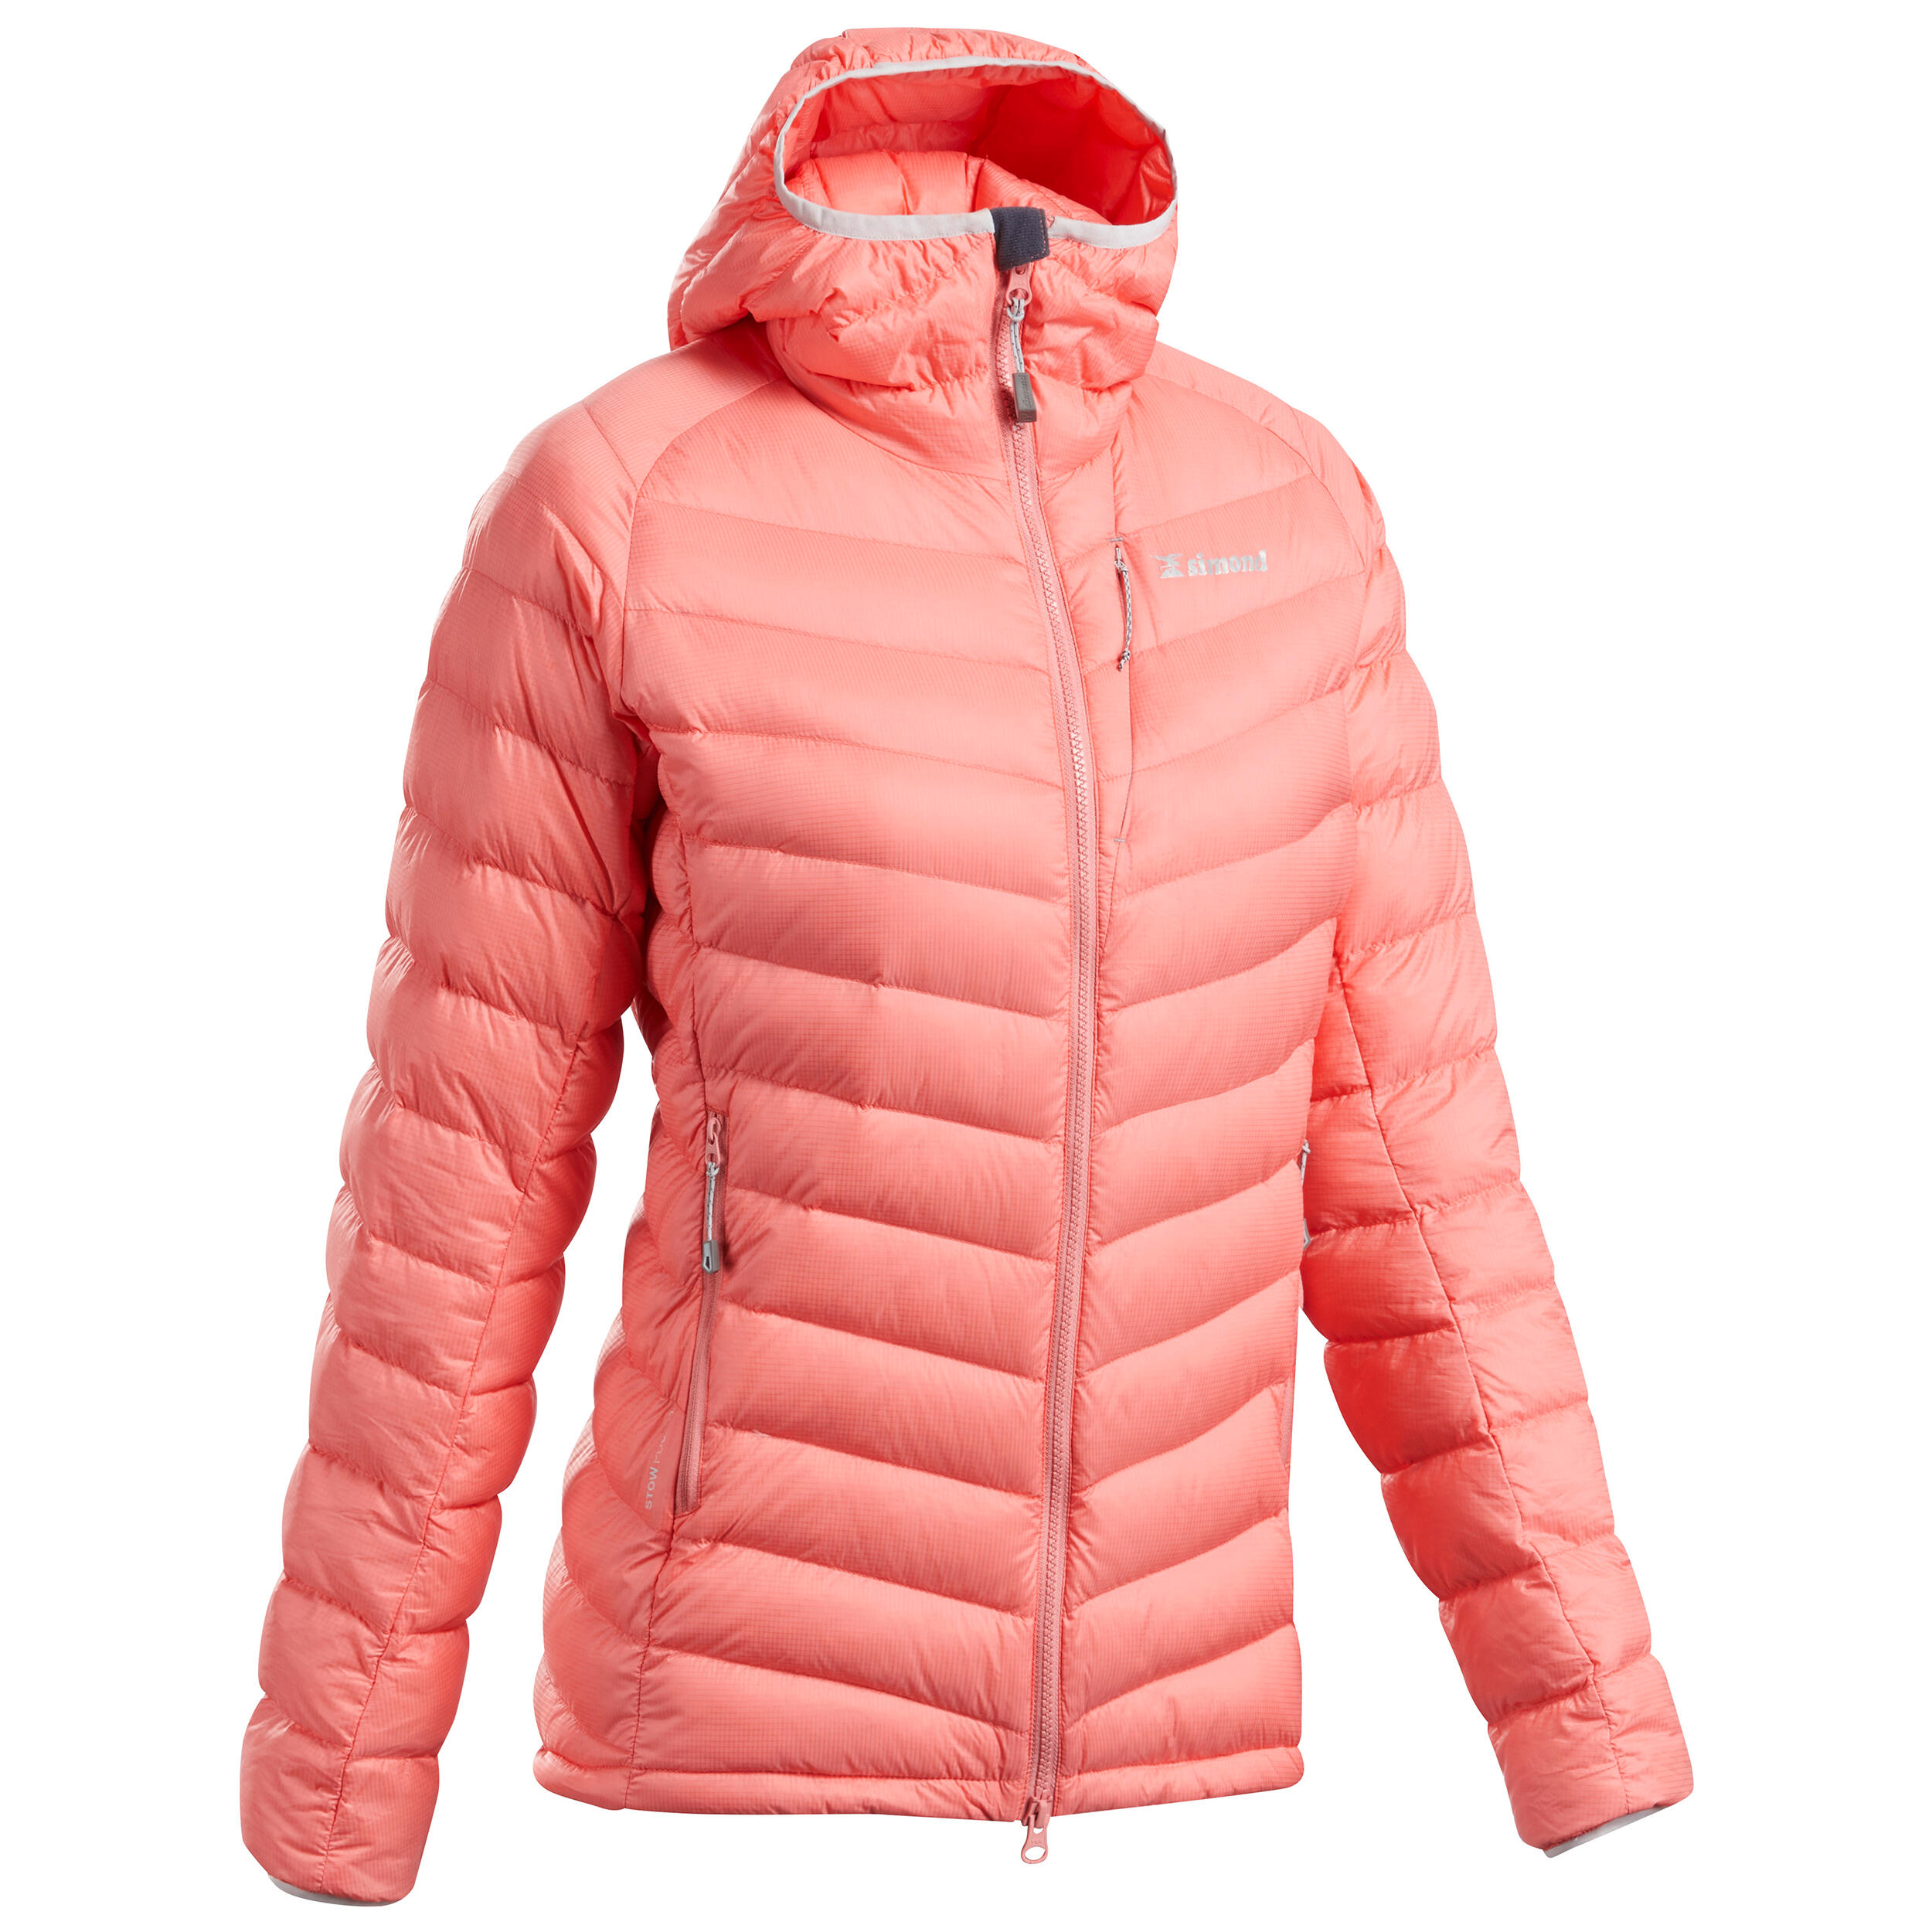 coral puffer jacket